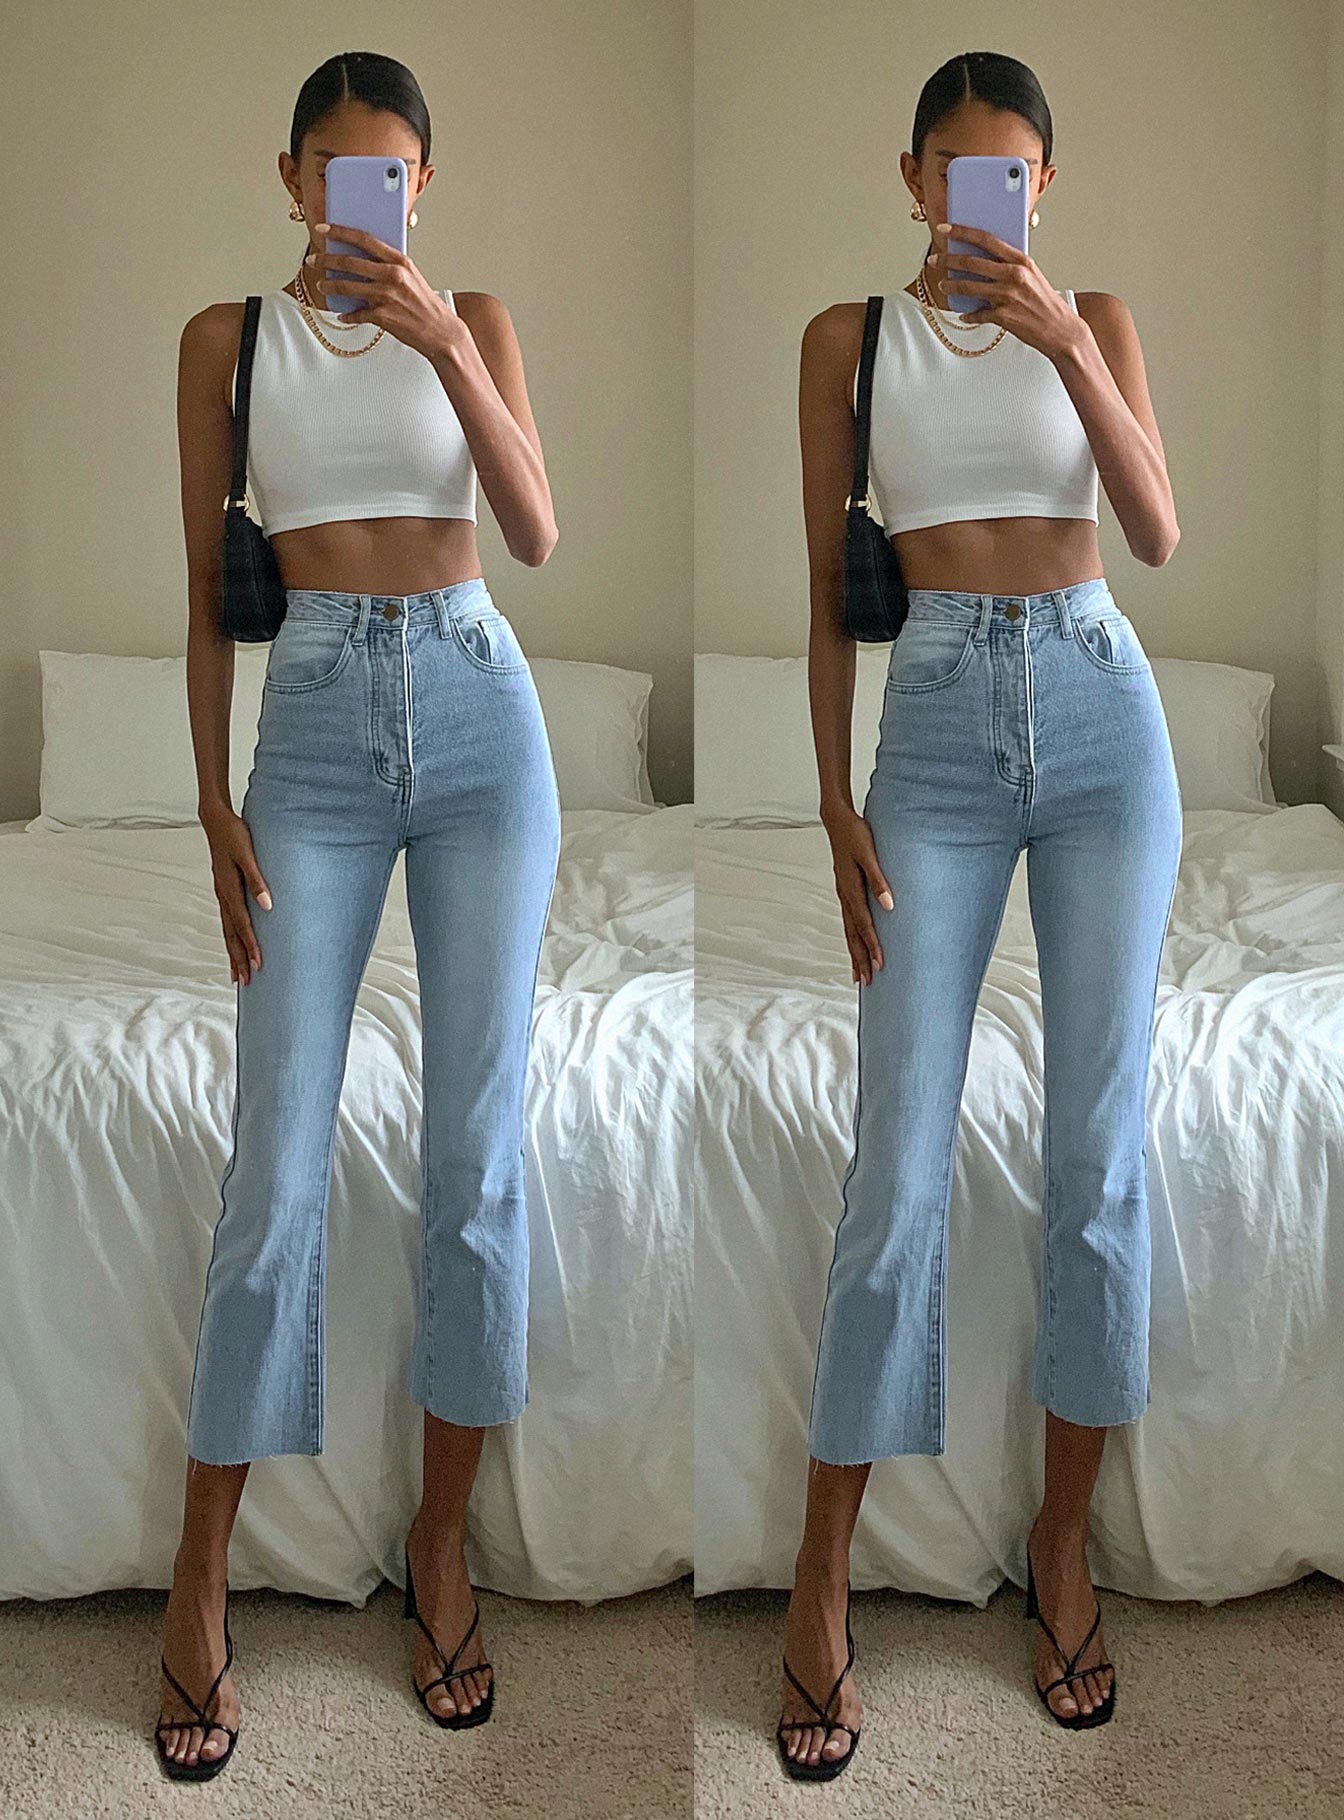 denim cropped trousers